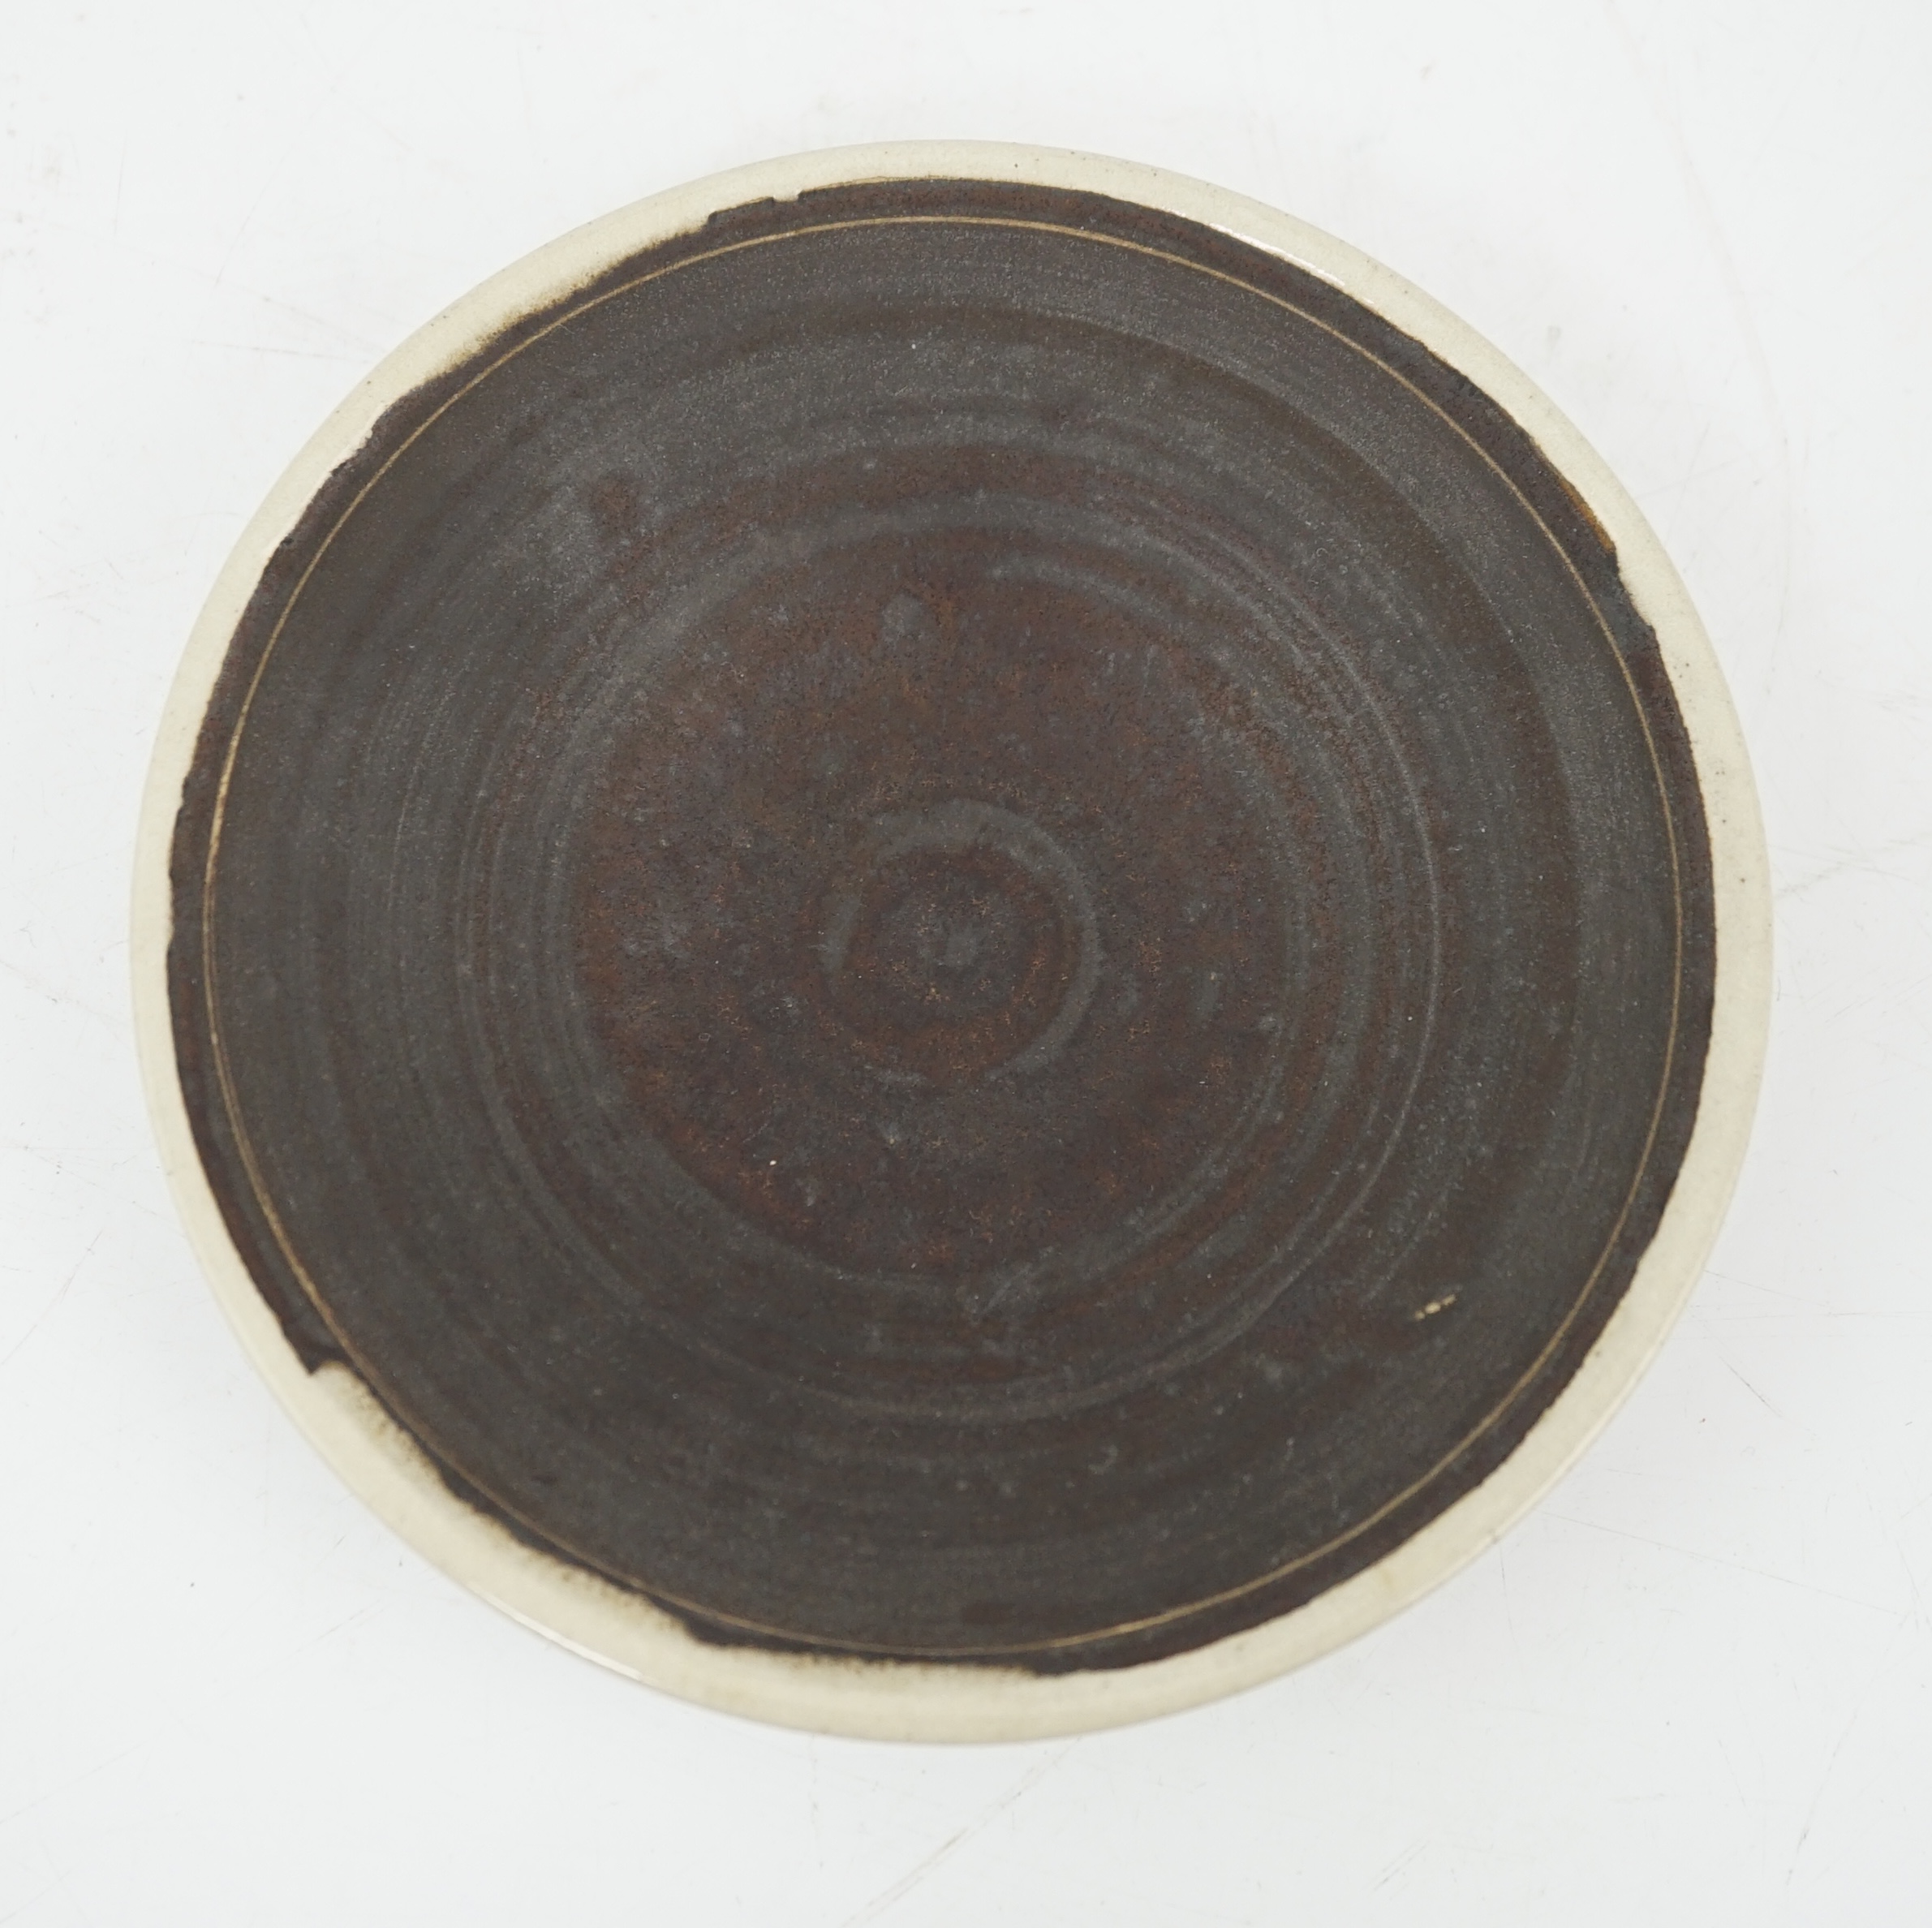 Dame Lucie Rie D.B.E. (1902-1995), a manganese glazed coffee cup and saucer